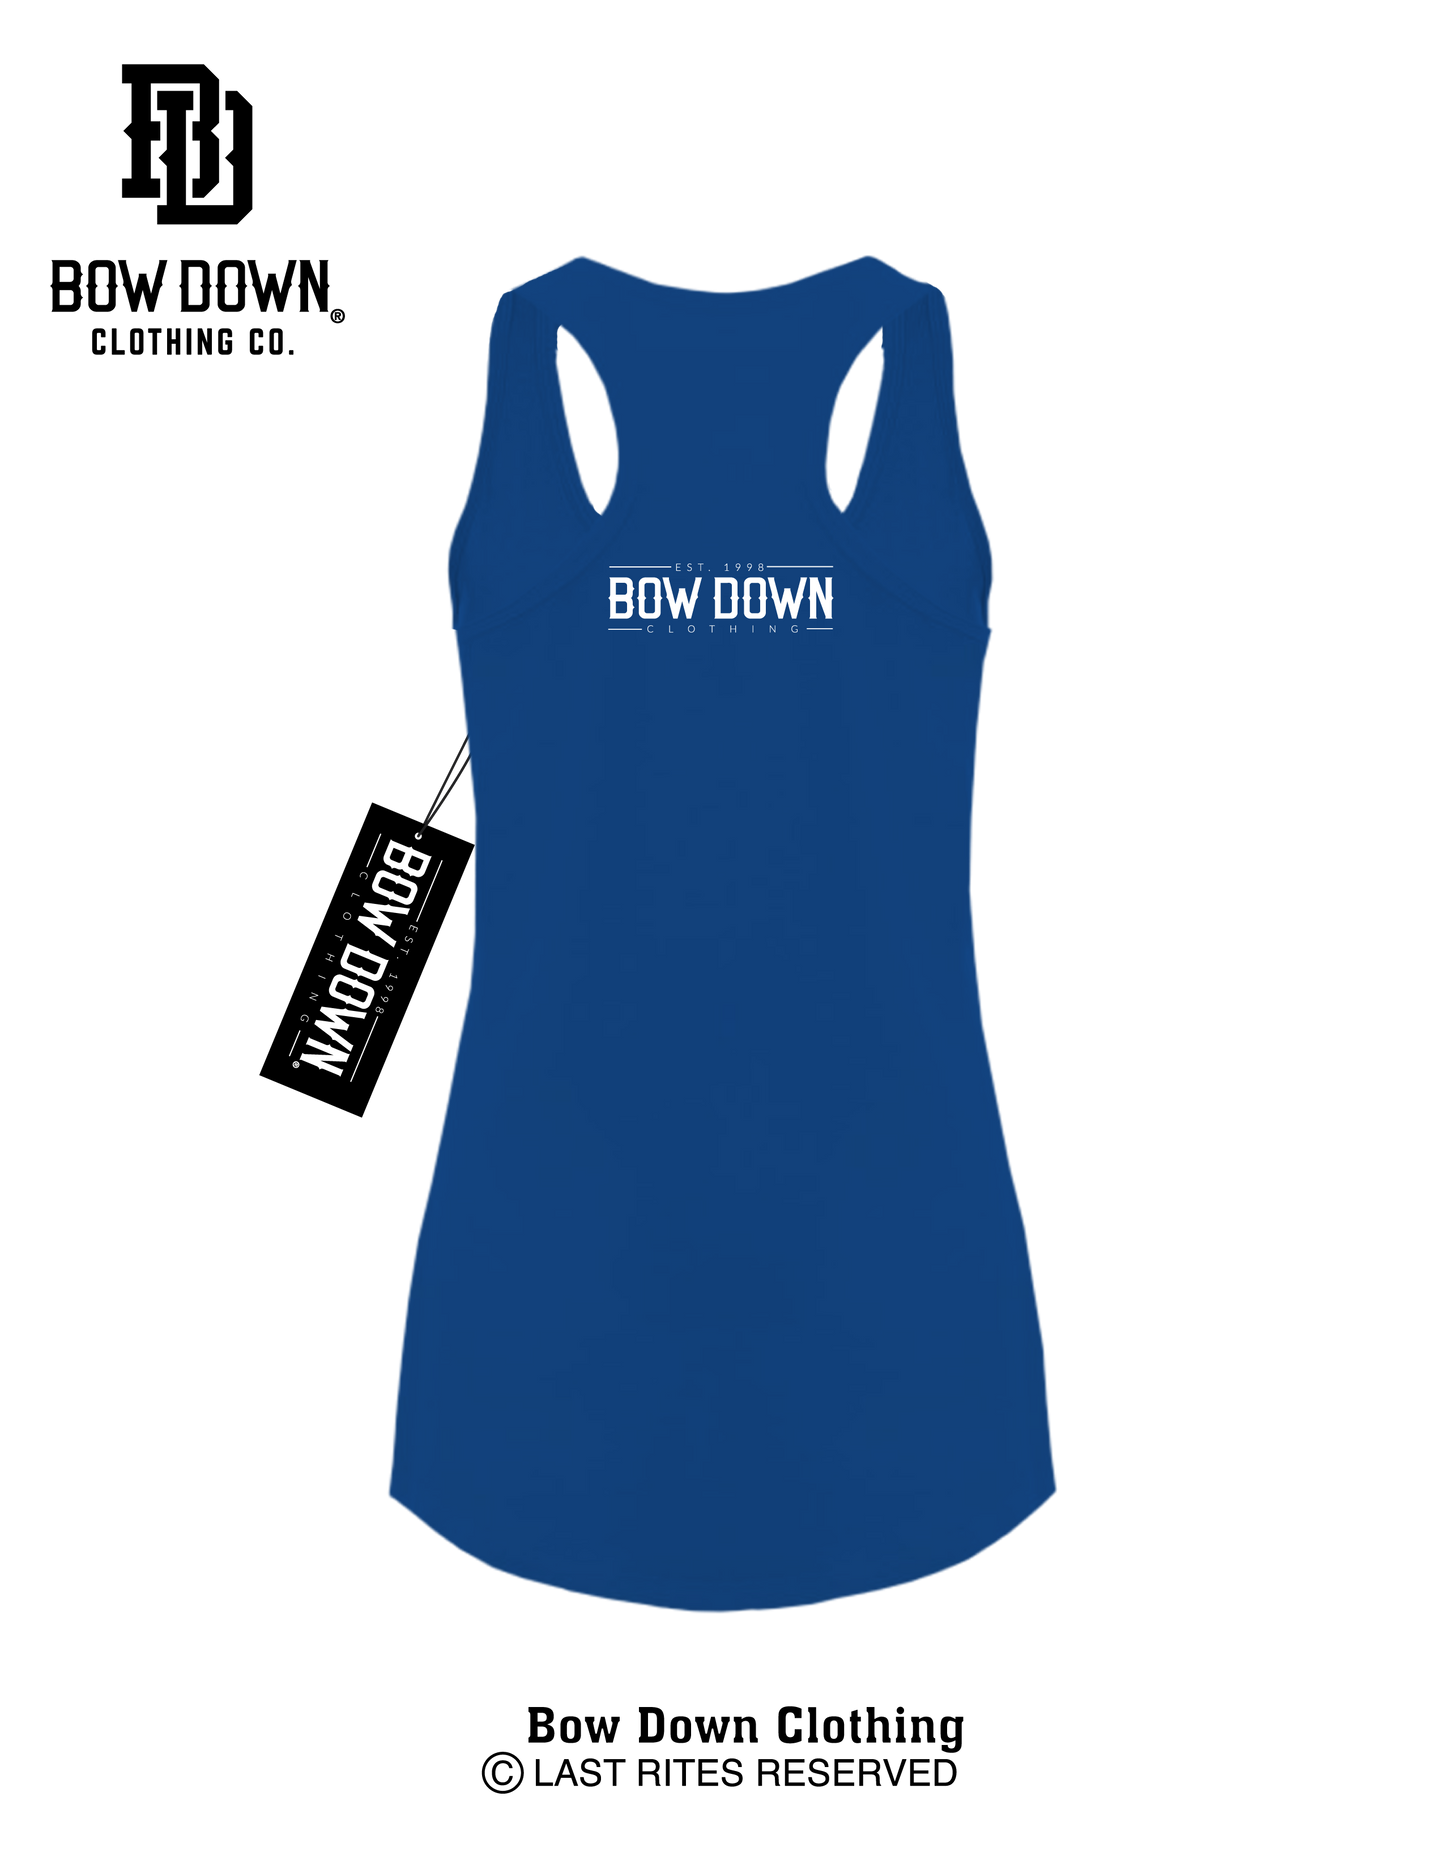 CAN'T RUSH PERFECTION WOMEN'S RACERBACK